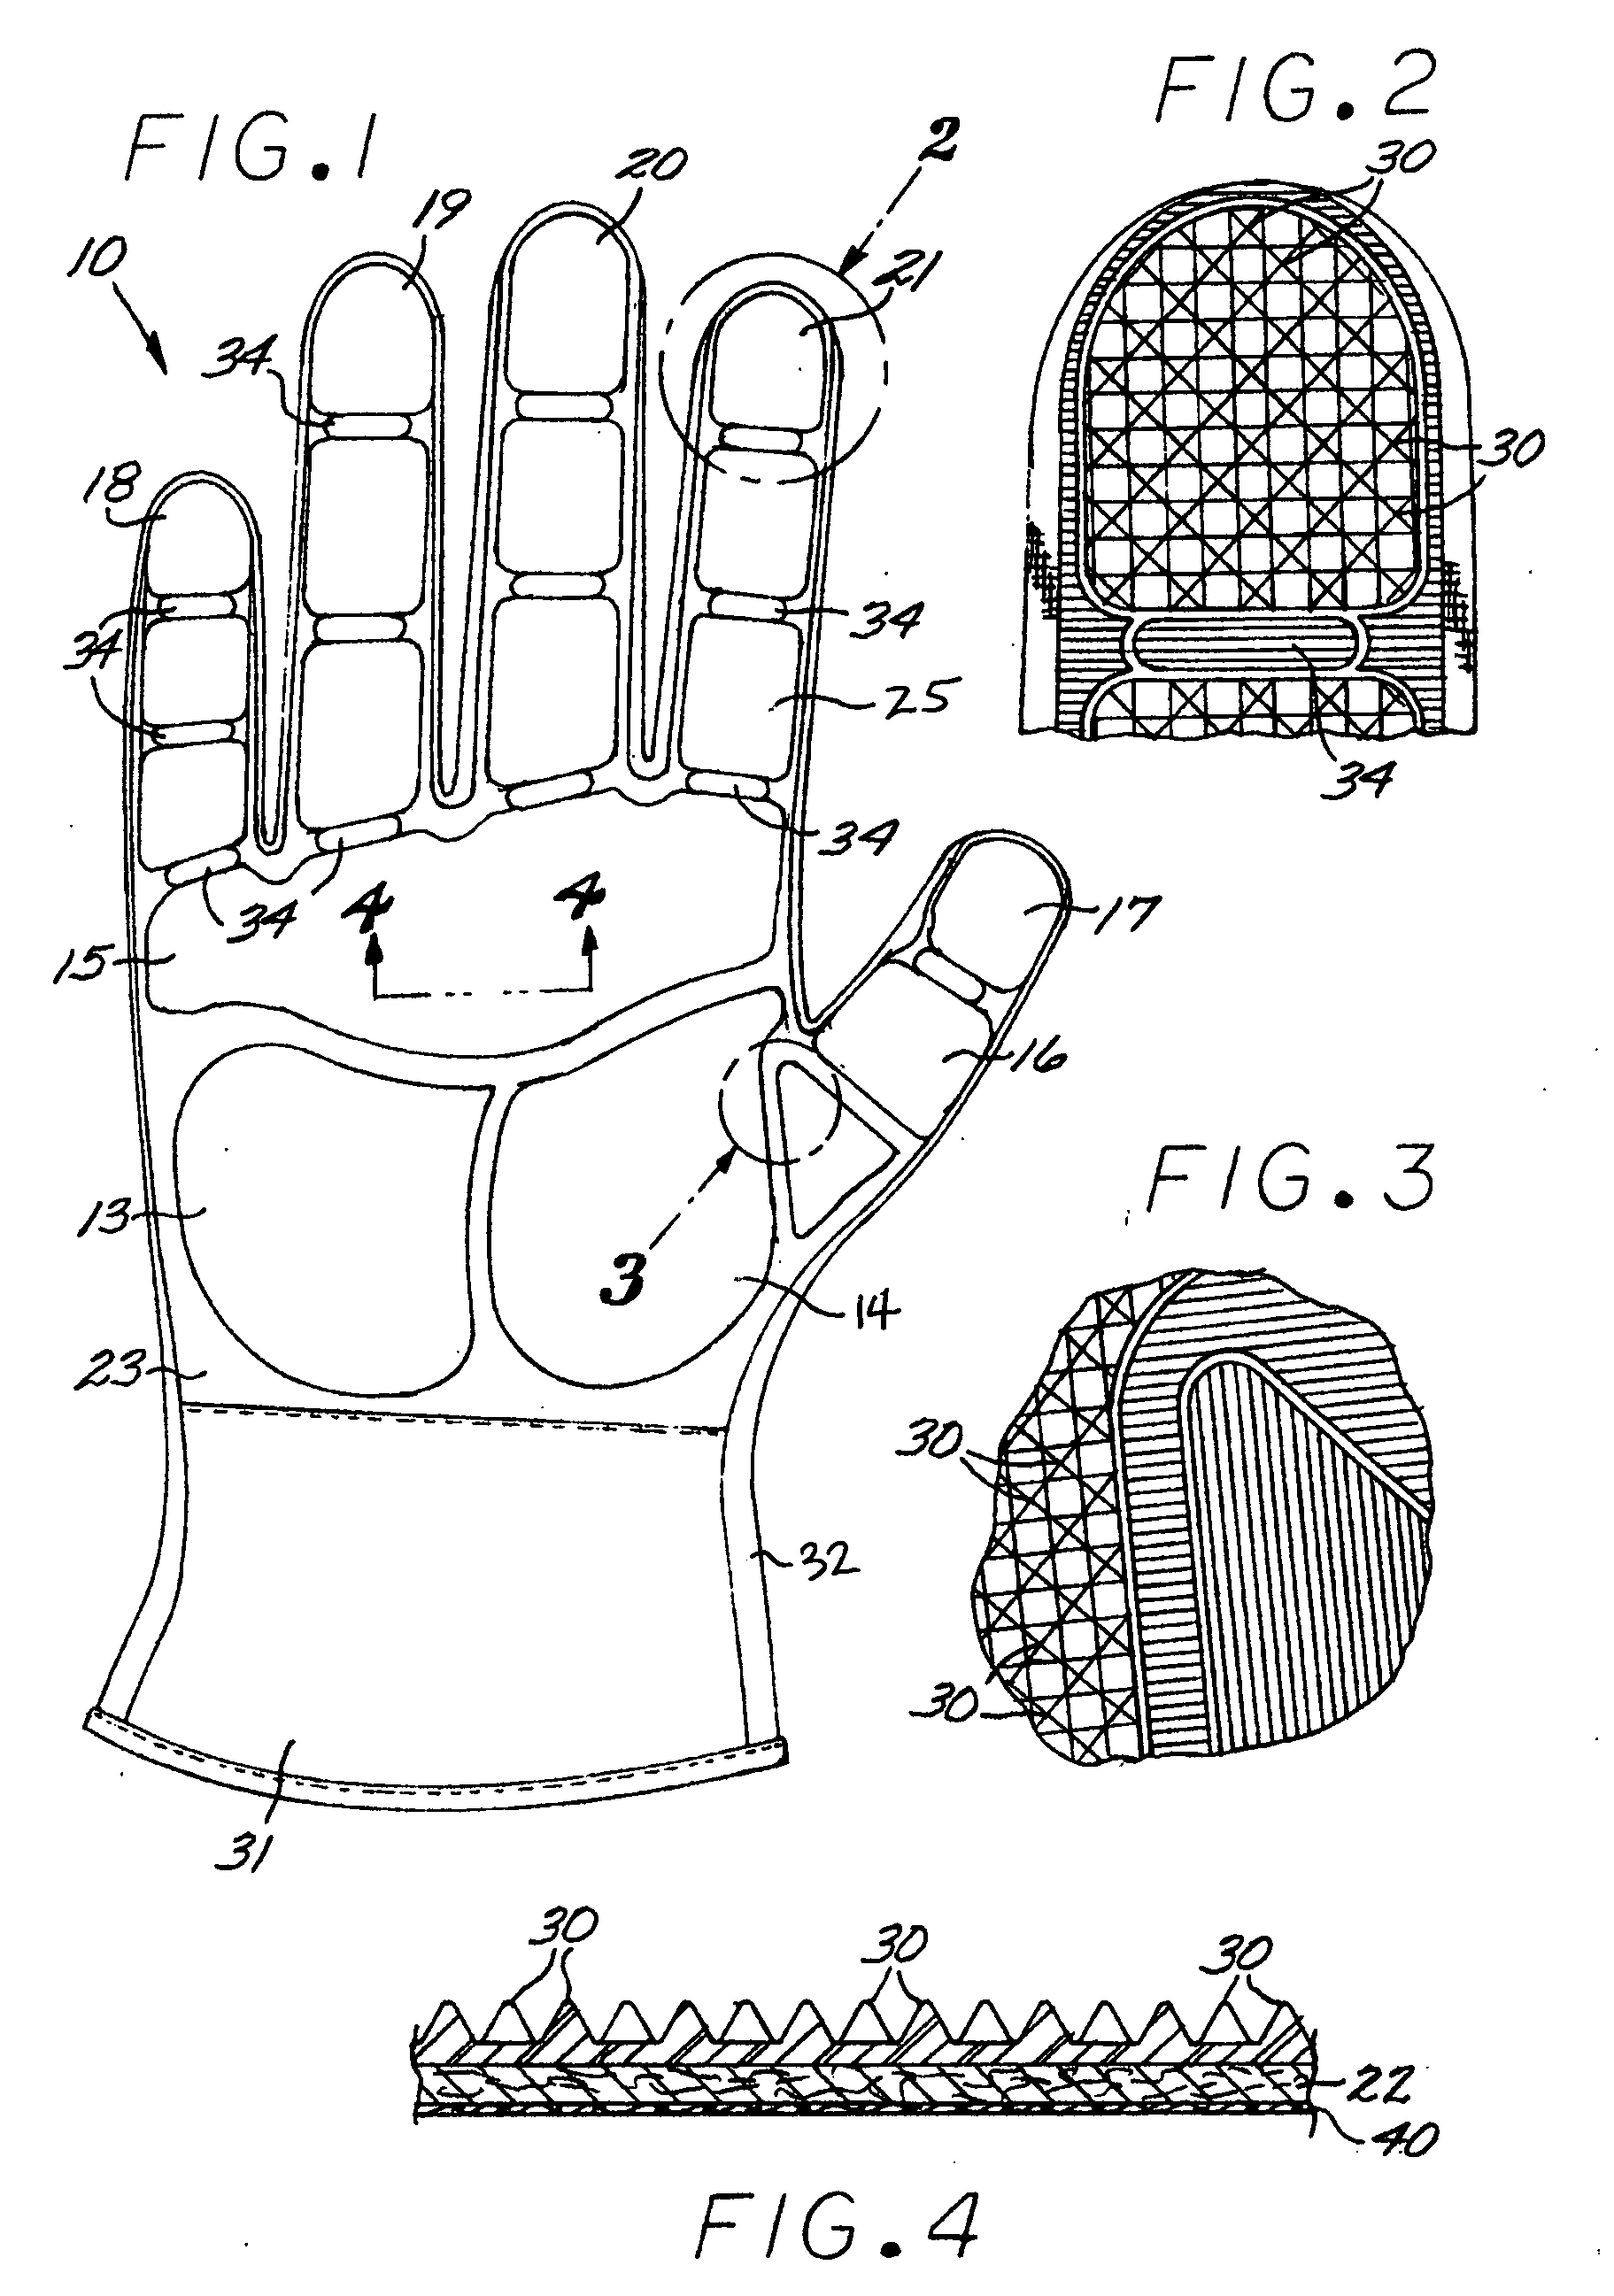 Glove having heat resistant silicone molded palm piece with protrusions extending therefrom